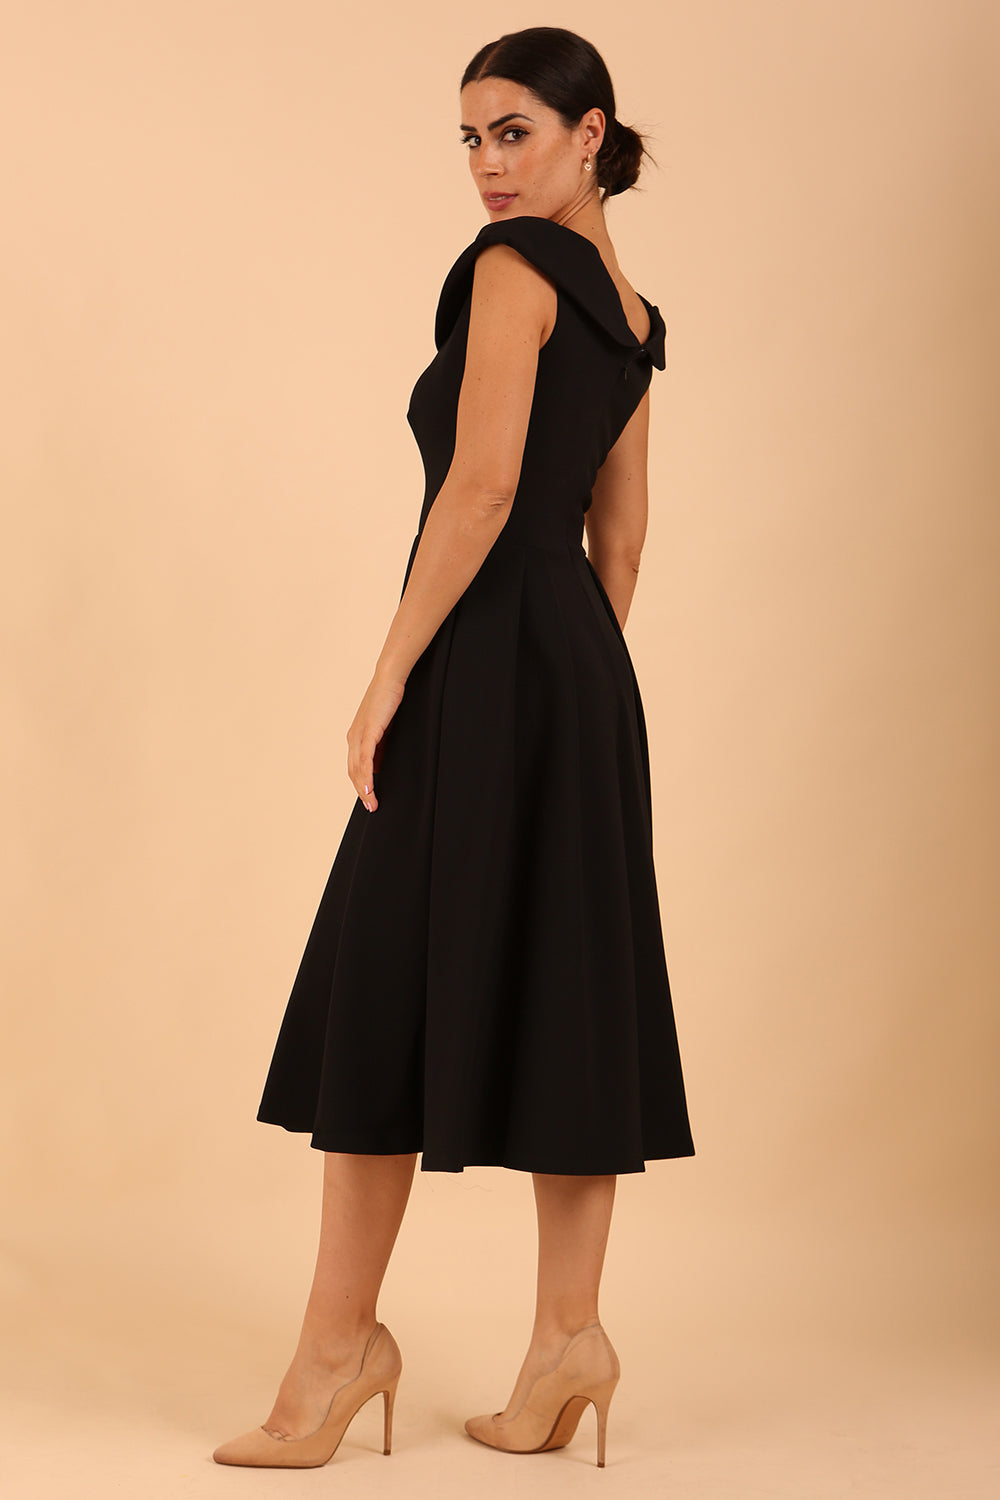 model is wearing divacatwalk Chesterton Sleeveless a-line swing dress in Black with oversized collar